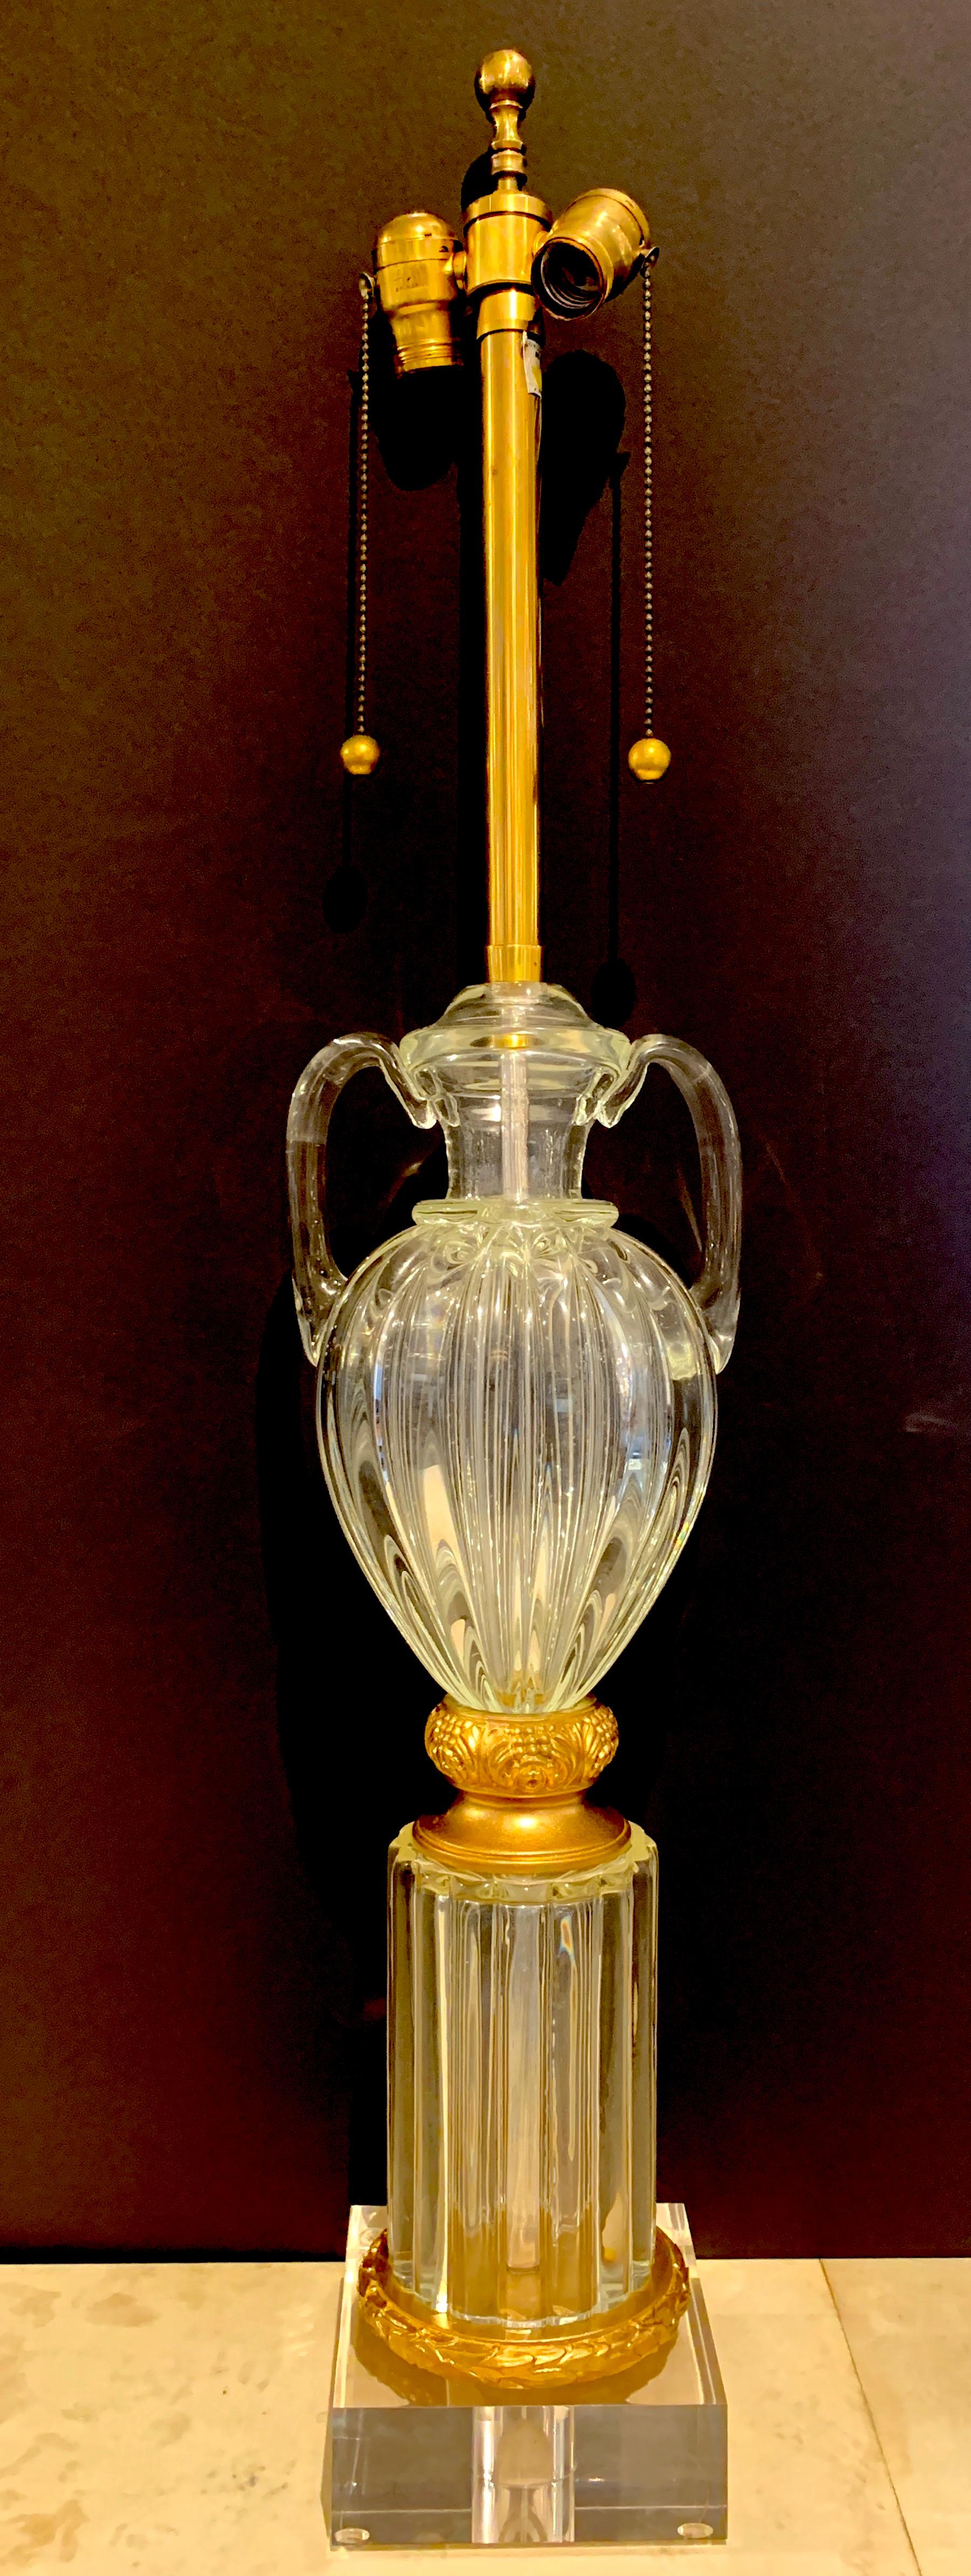 Tall Murano glass Amphora lamp by Marbro, great size and scale, rare colorless Murano glass, crisp and clear. New wiring 
The lamp to the top of the finial measures 39